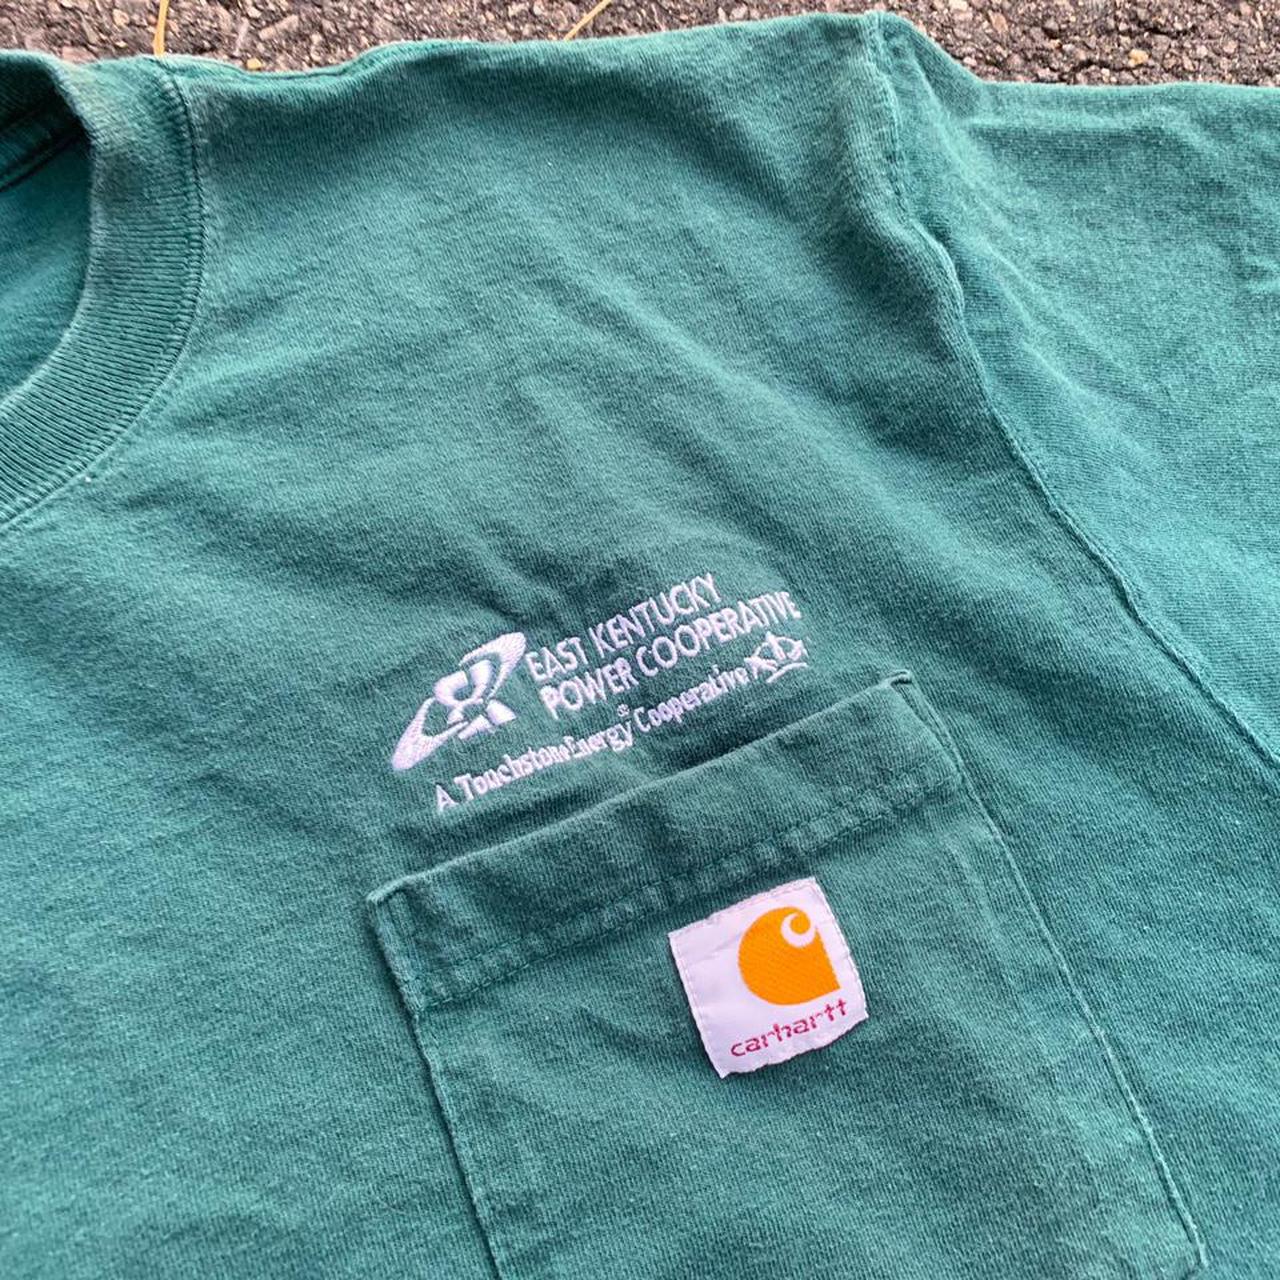 Product Image 2 - Carhartt Forest Green Pocket Tee